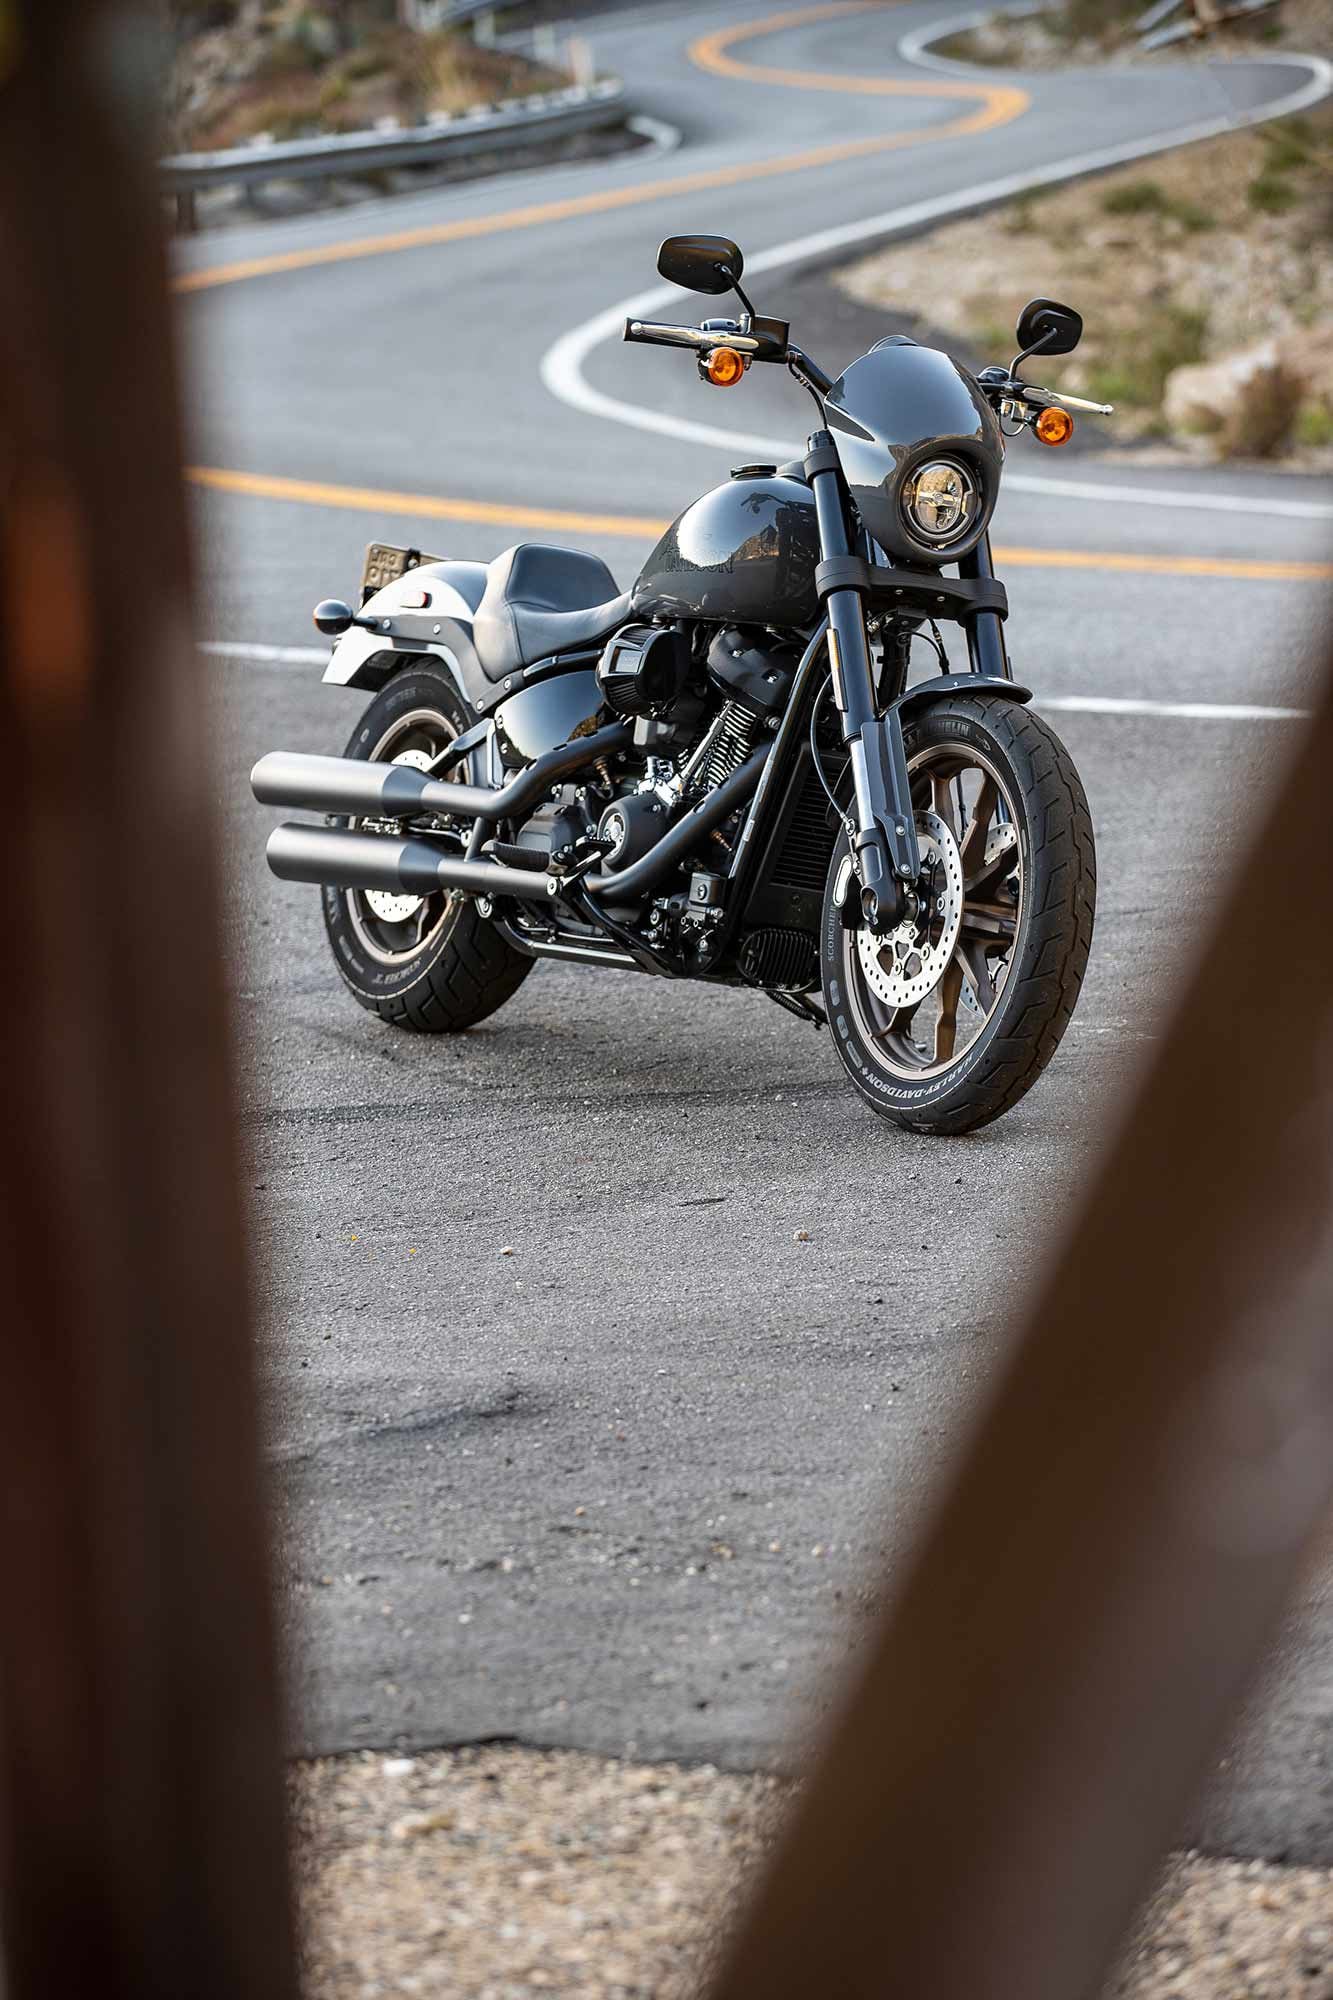 The Low Rider S is designed in what H-D calls “West Coast style,” but the rest of the world refers to as “club style.”